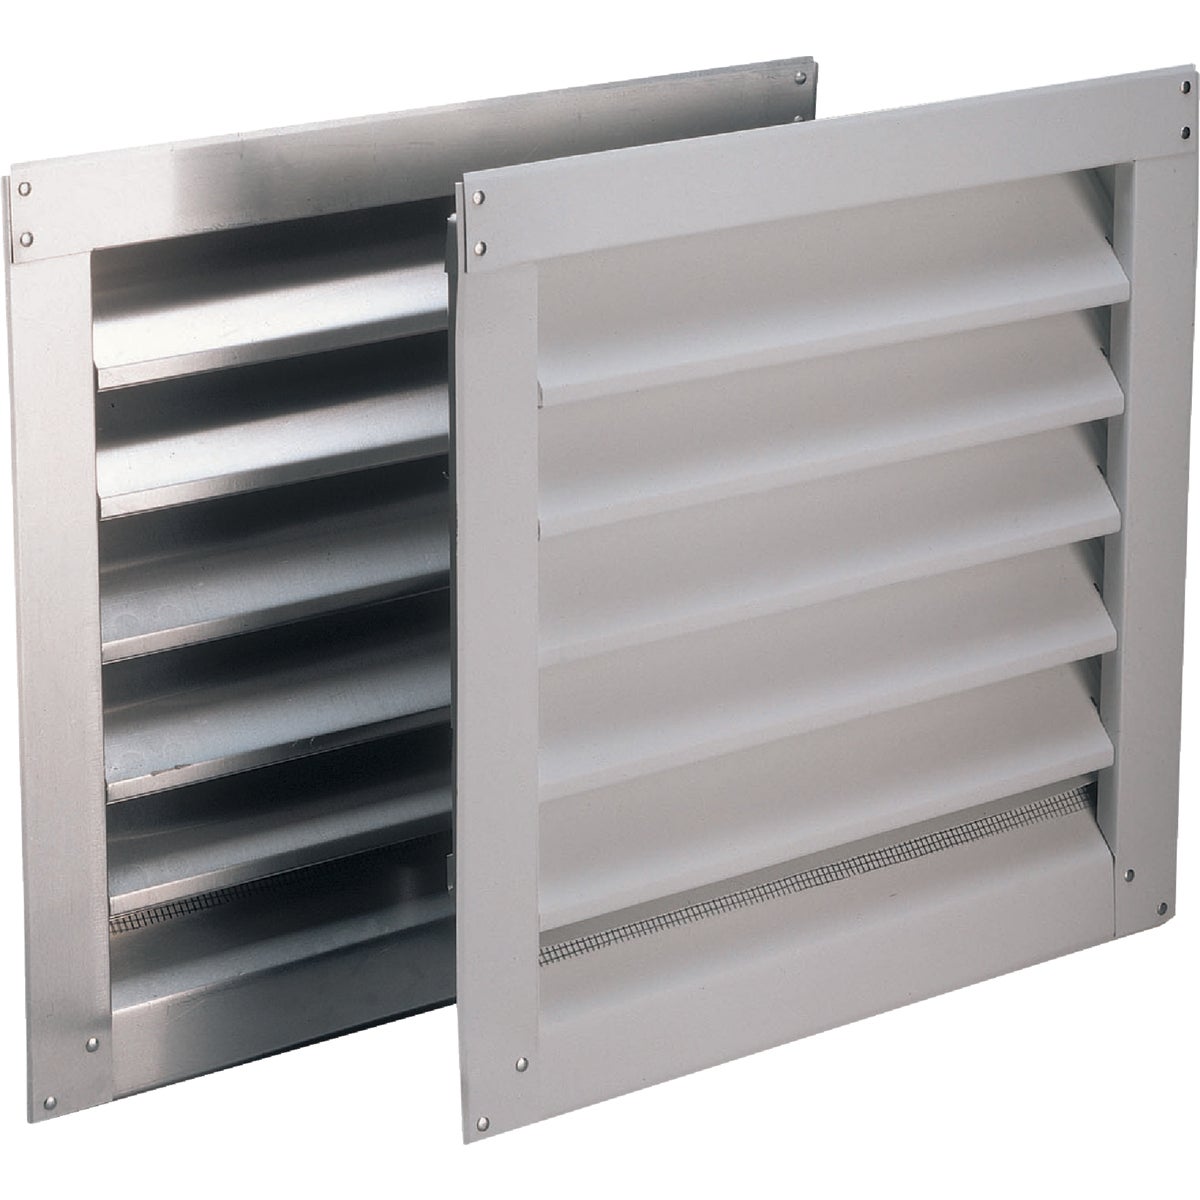 Item 106441, Wall louvers are installed in the gable end of the attic and provide 